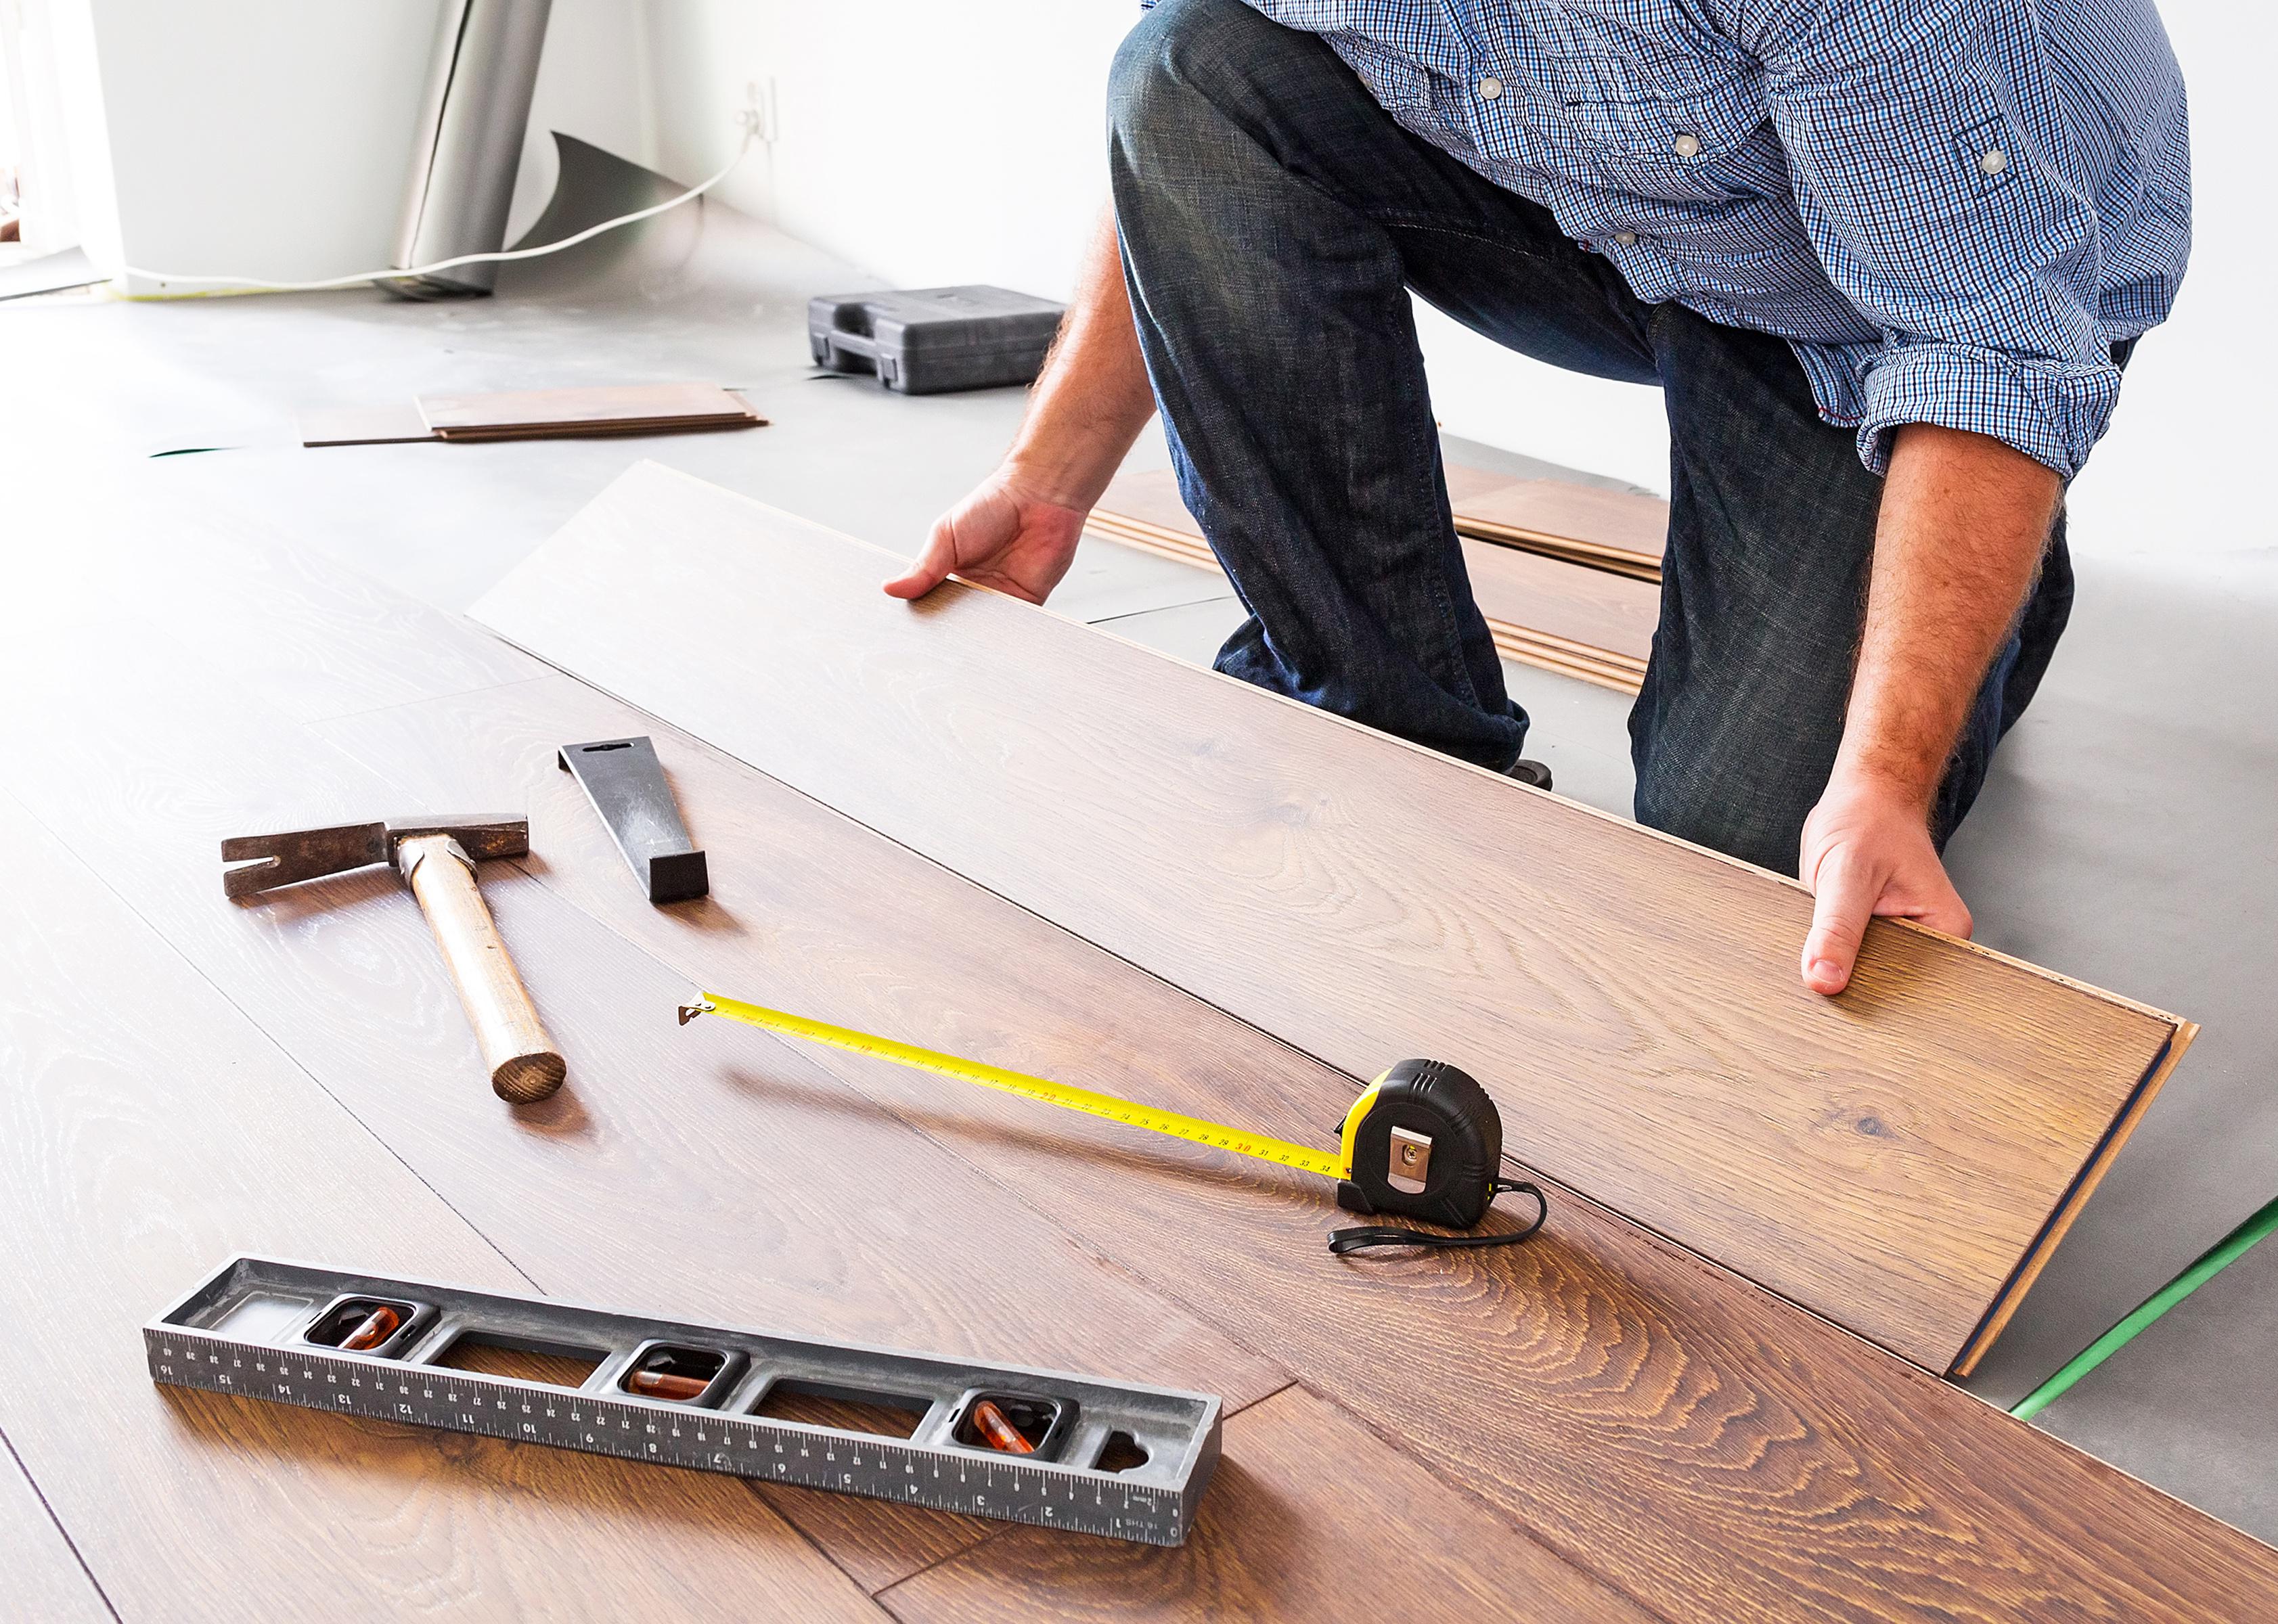 New wooden flooring is being laid in a home, with a measuring tape and tools visible